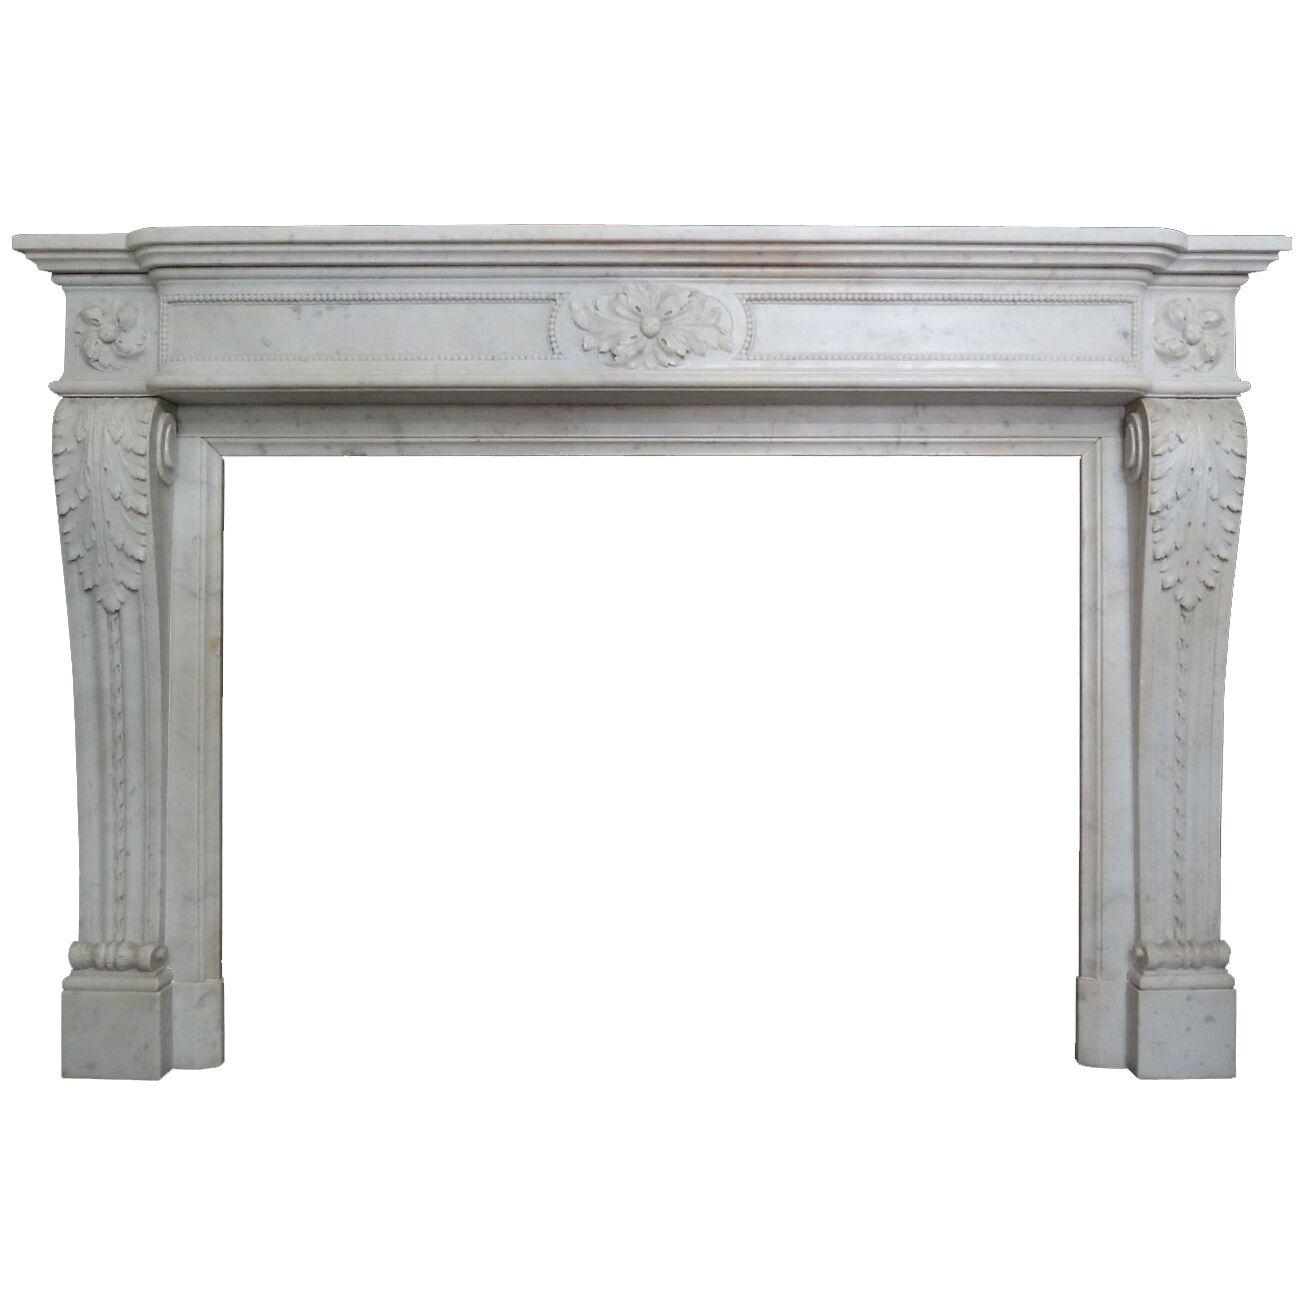 An Antique French Louis XVI Style Carved Marble Fireplace Mantel